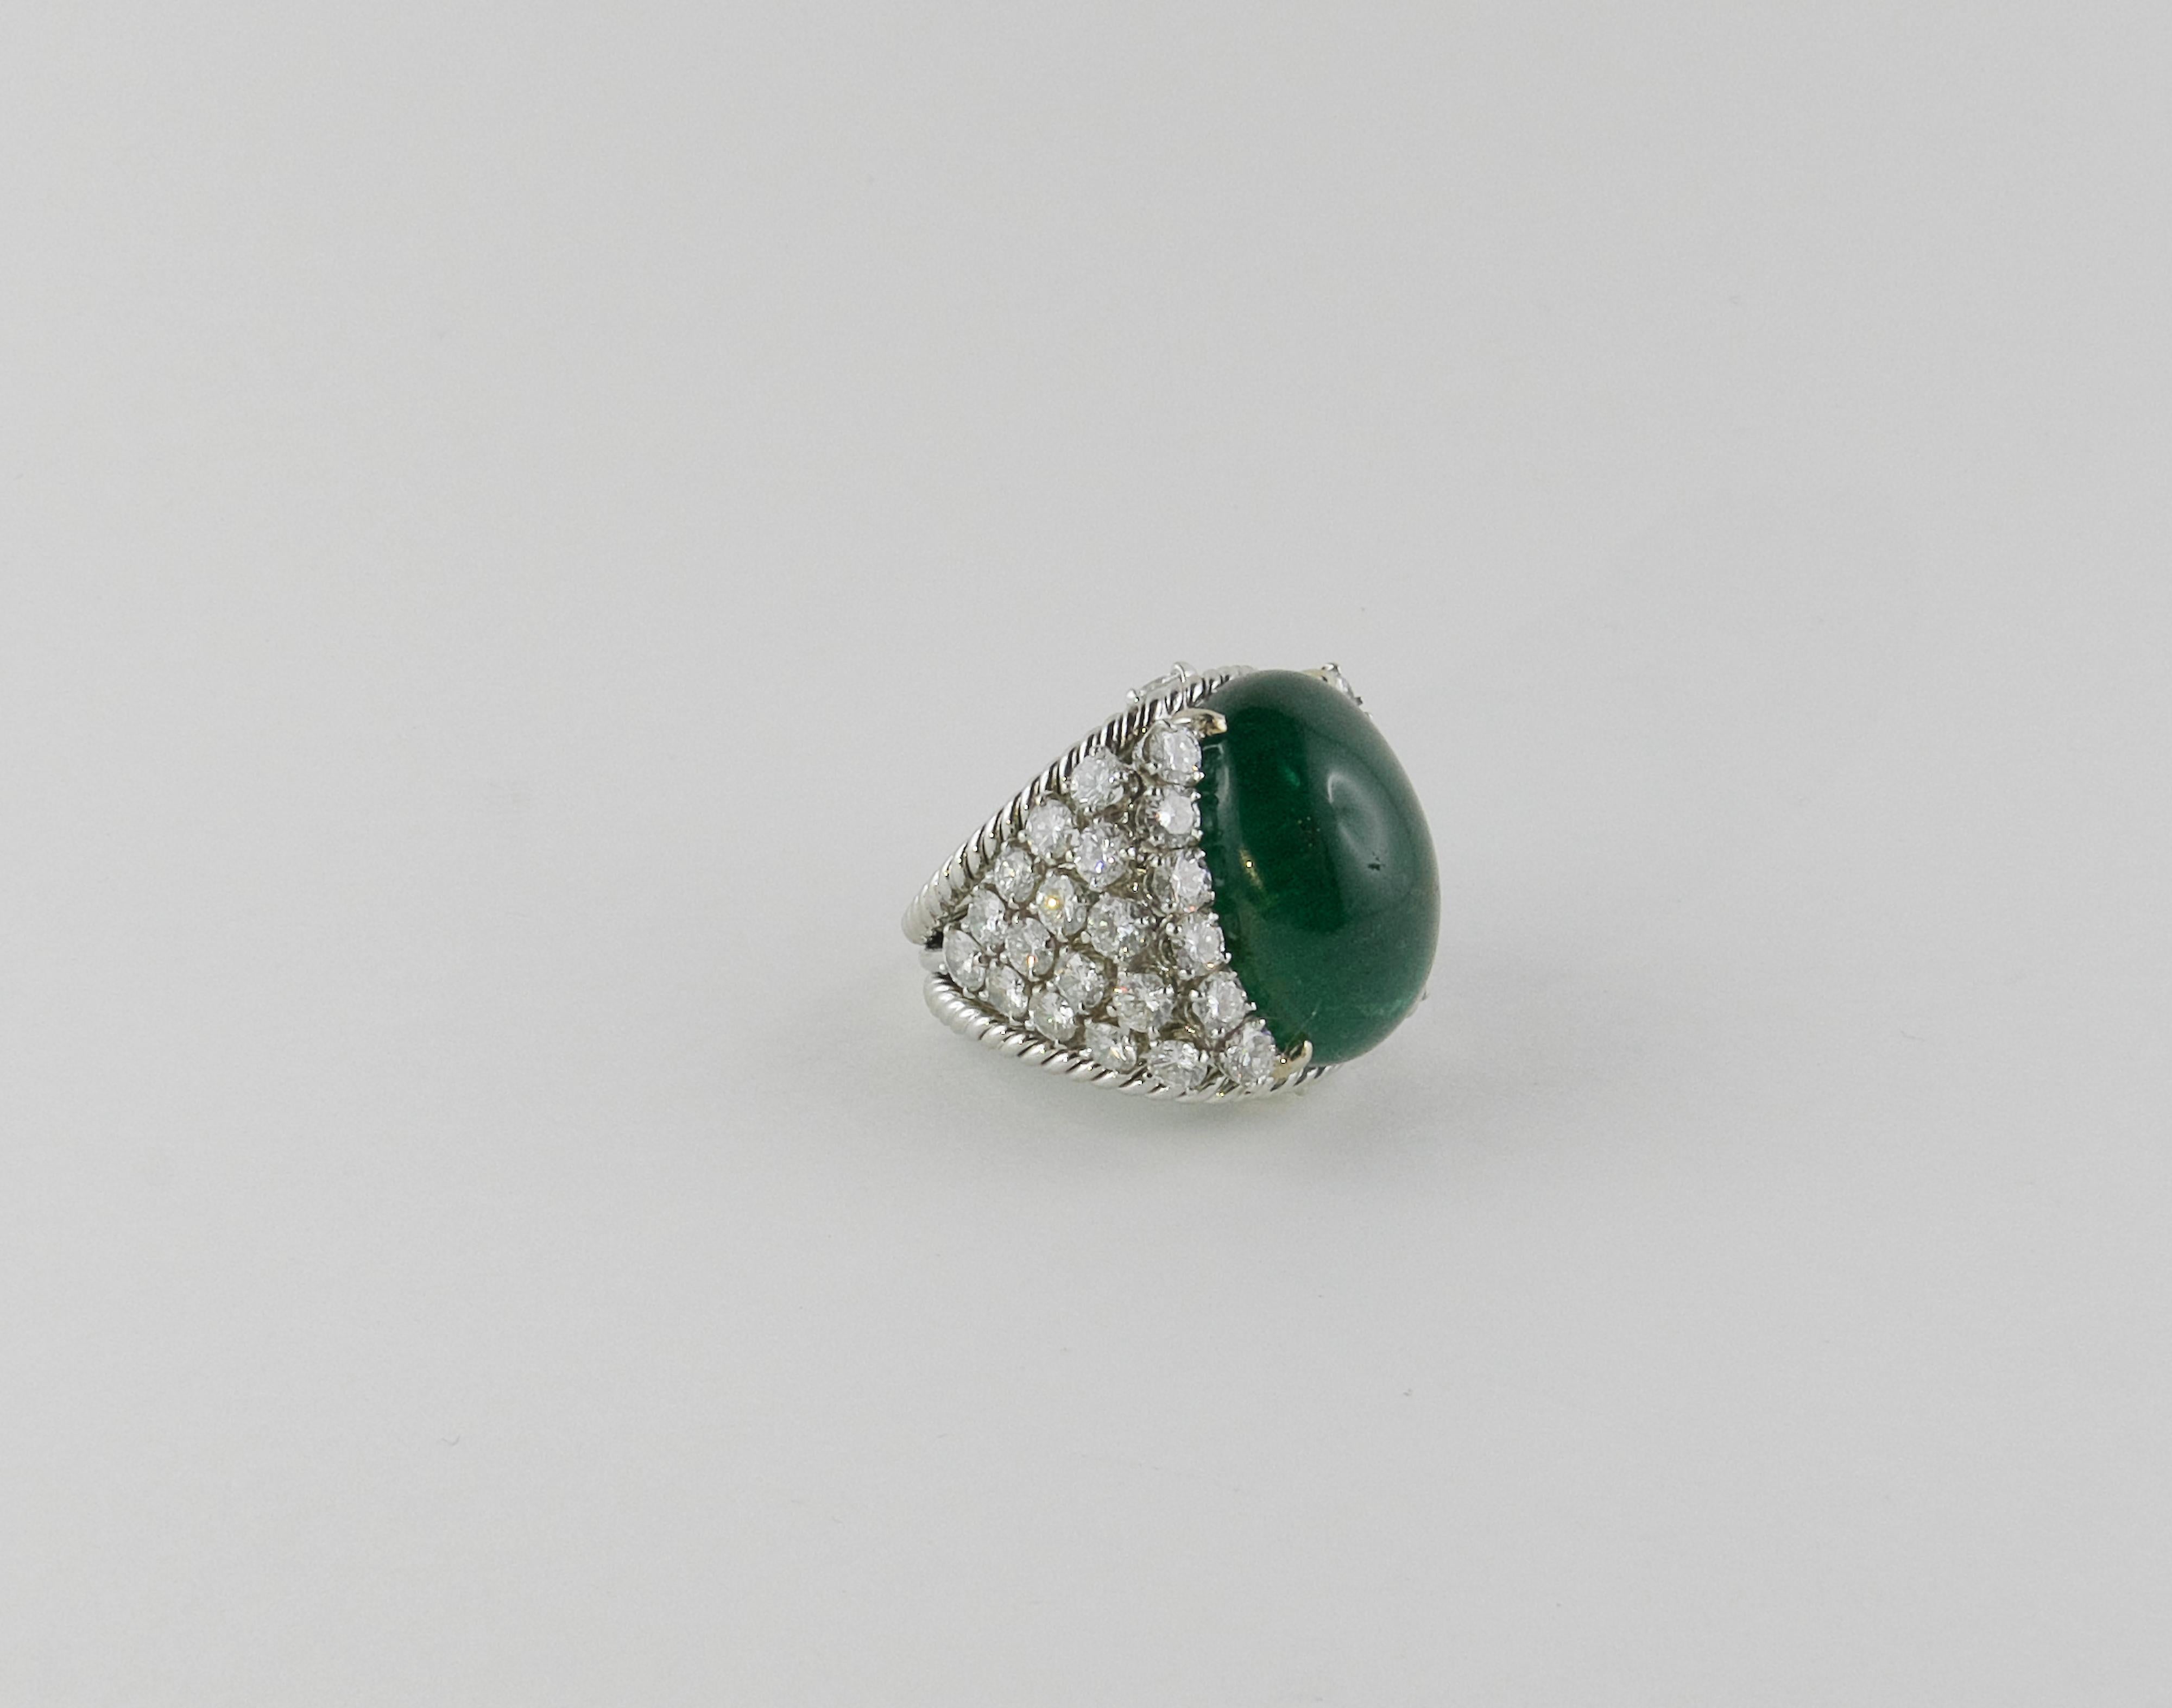 A deep green 27.15 cts Emerald oval cabochon set within a brilliant-cut diamond surround,is the focal point of this  bombé cocktail Ring signed David Webb. To accentuate the centre stone, the completely handmade mounting in Platinum is set with 7